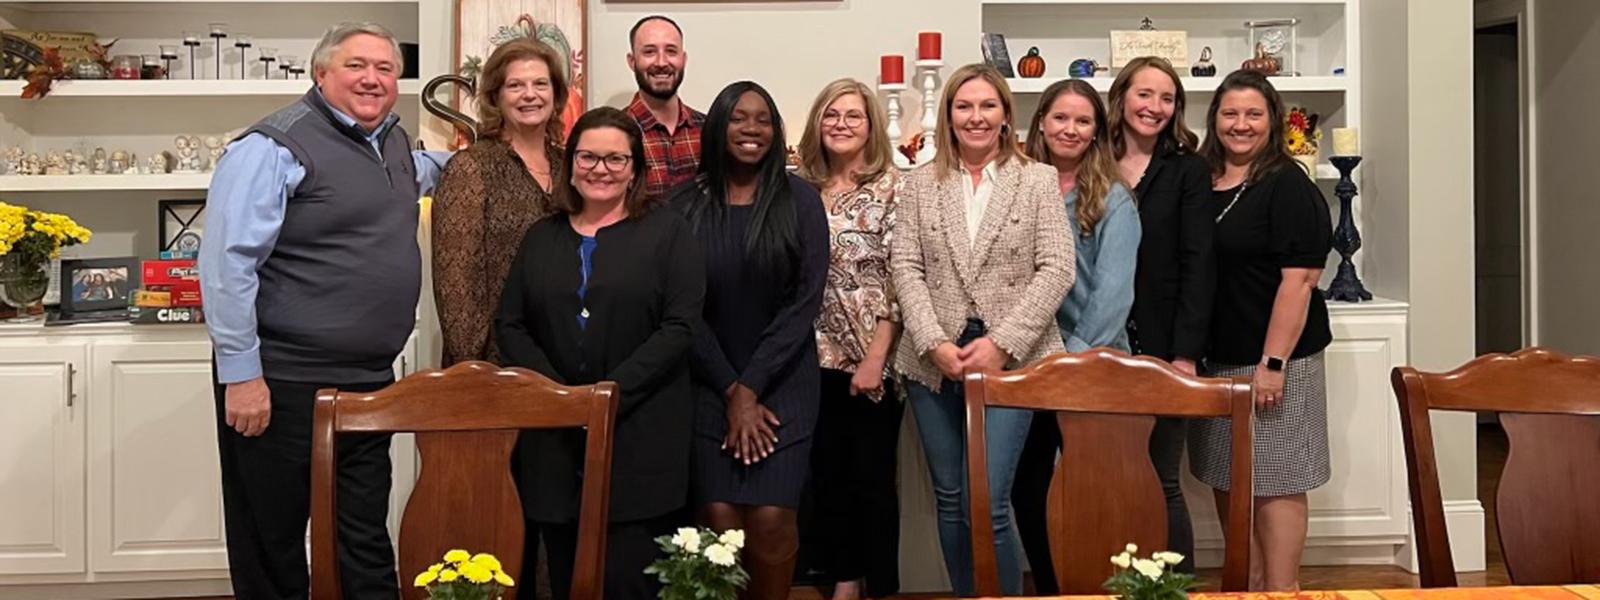 Some nursing students, and nursing faculty and staff were recent guests of CIU President Dr. Mark A. Smith (left) and his wife Debbie (right).